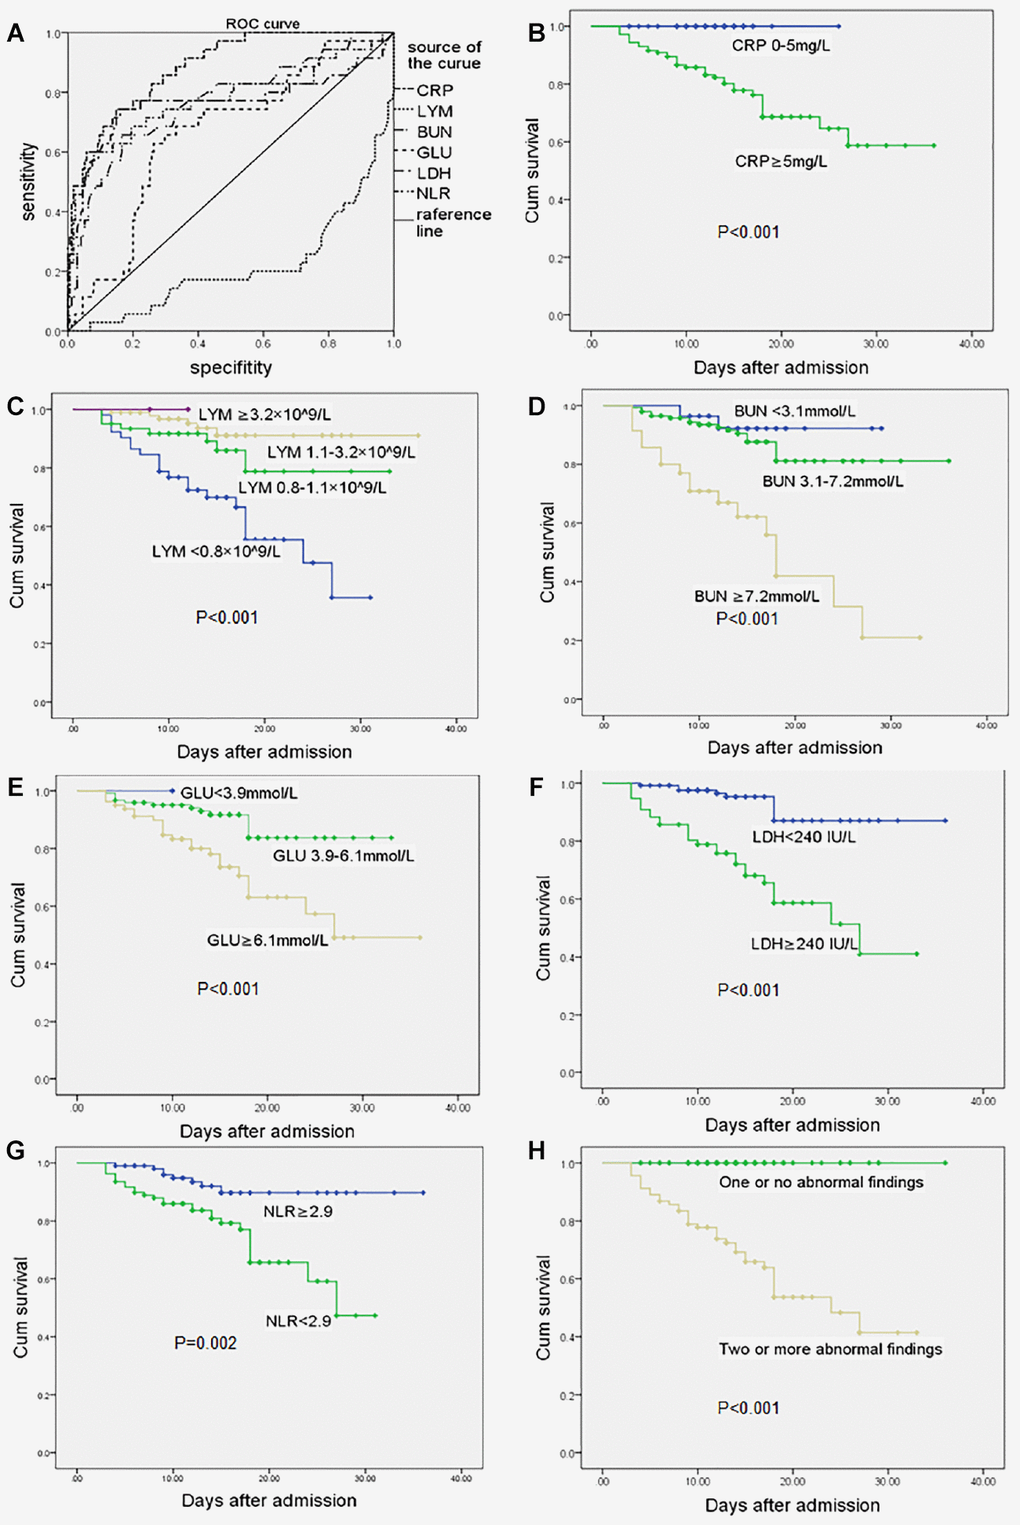 Receiver operating characteristic curve and survival curve. (A) ROC in CRP, LYM, BUN, GLU, LDH, NLR at admission. Survival curves in elderly COVID-19 patients with different levels of CRP (B), LYM(C), BUN (D), GLU (E), LDH (F), NLR (G, NLR value take median value in total patients) at admission. (H) Two or more abnormal values of CRP, LYM, BUN, LDH in the patients at admission can significantly predict poor prognosis of COVID-19 infected elderly patients. Abbreviations: COVID-19, coronavirus disease 2019; ROC, receiver operating curve; CRP, C-reactive protein; LYM, lymphocytes; BUN, blood urea nitrogen; GLU, glucose; LDH, lactate dehydrogenase; NLR, neutrophil-to-lymphocyte ratio. P-value reported in each subplot indicates the difference between survival curves by Kaplan-Meier method with log-rank test. P 